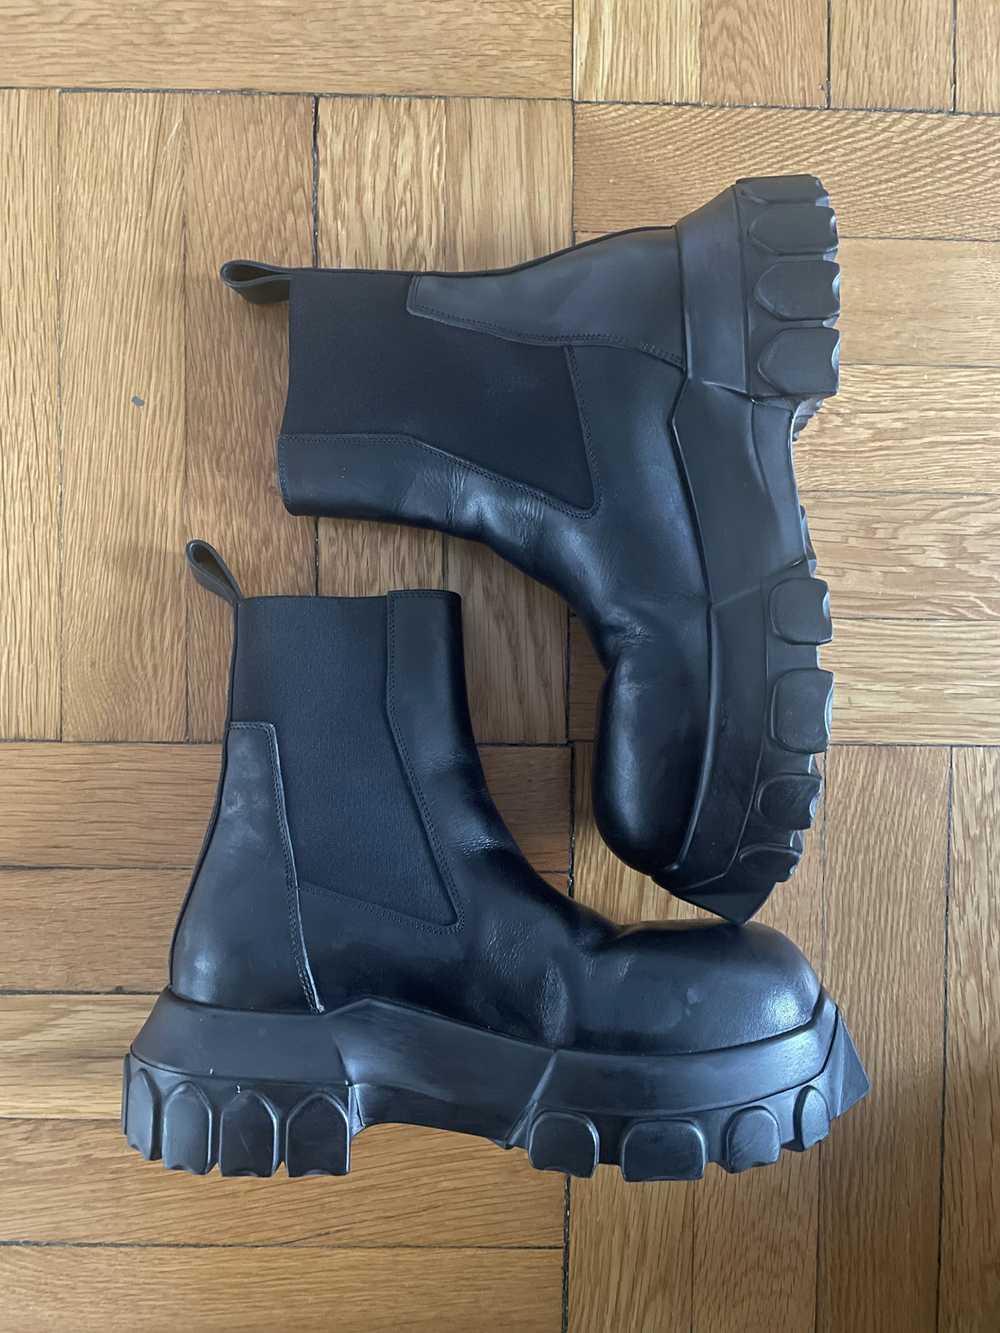 Rick Owens Beatle Bozo Tractor Boots - image 3